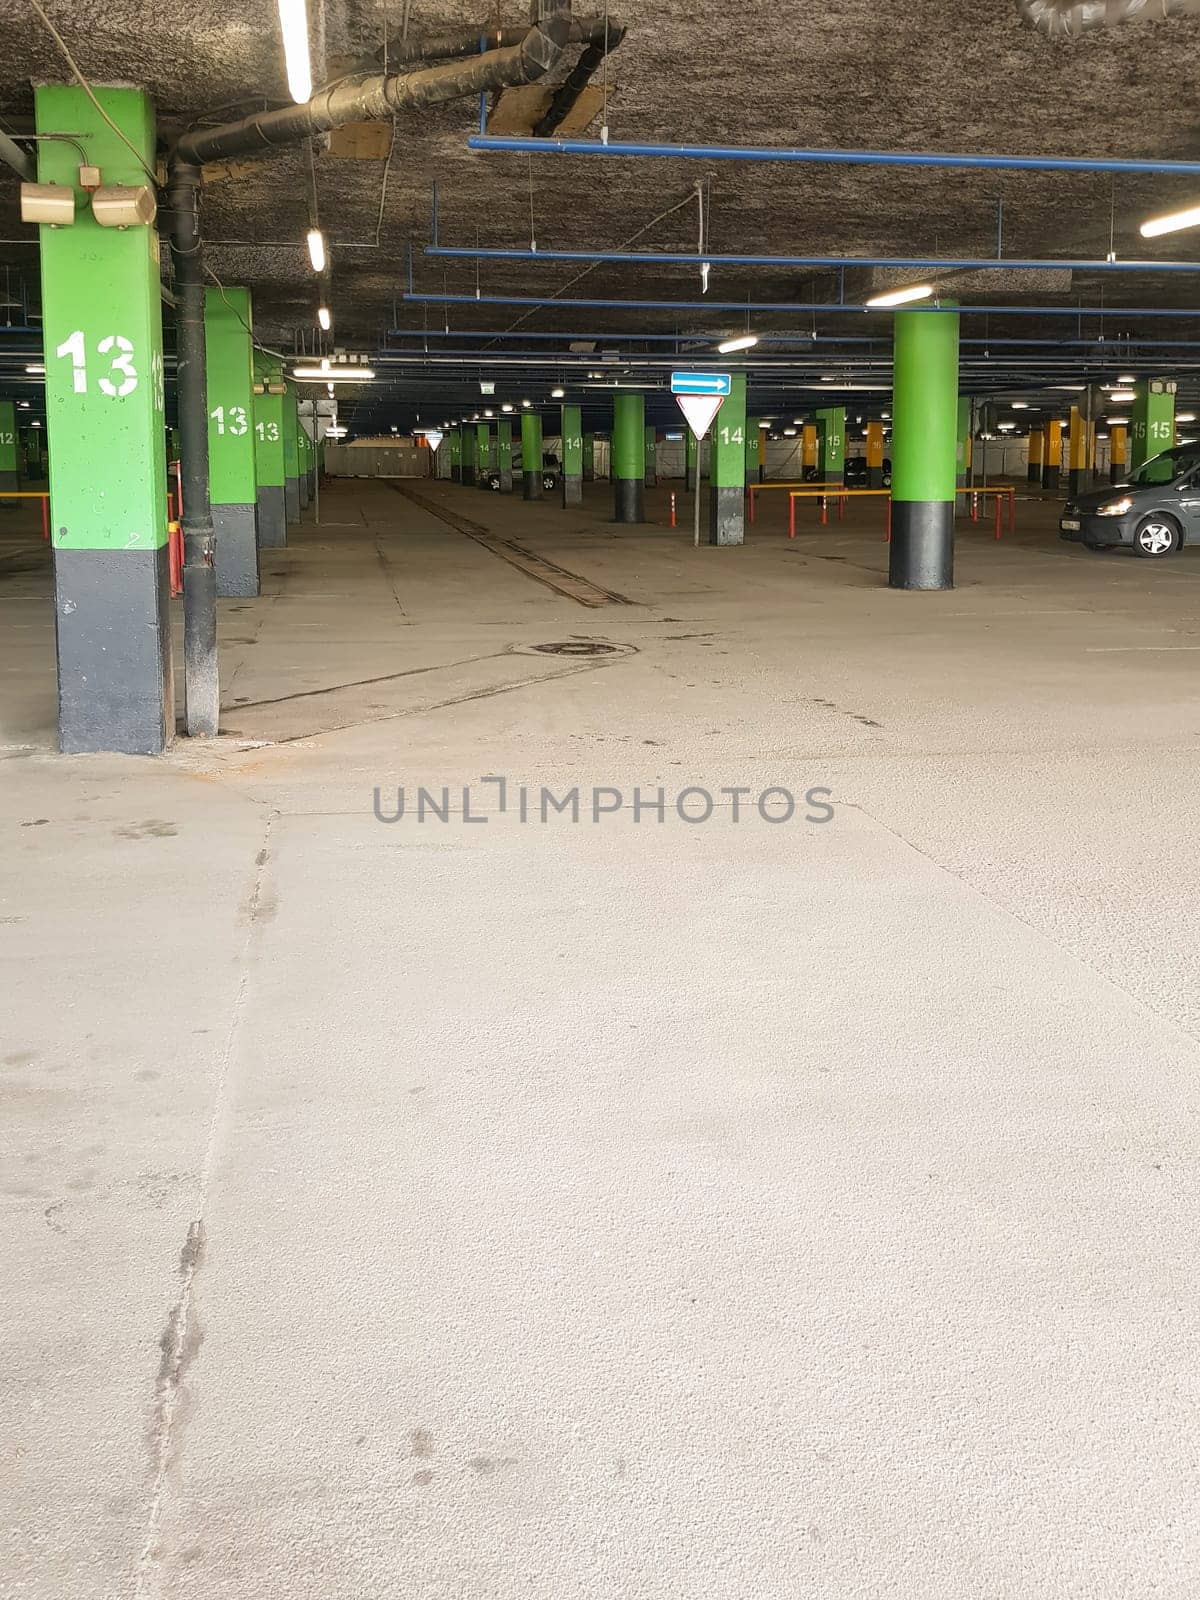 Underground Parking with poles with markings for cars in the shopping center, a place for text at the bottom by claire_lucia